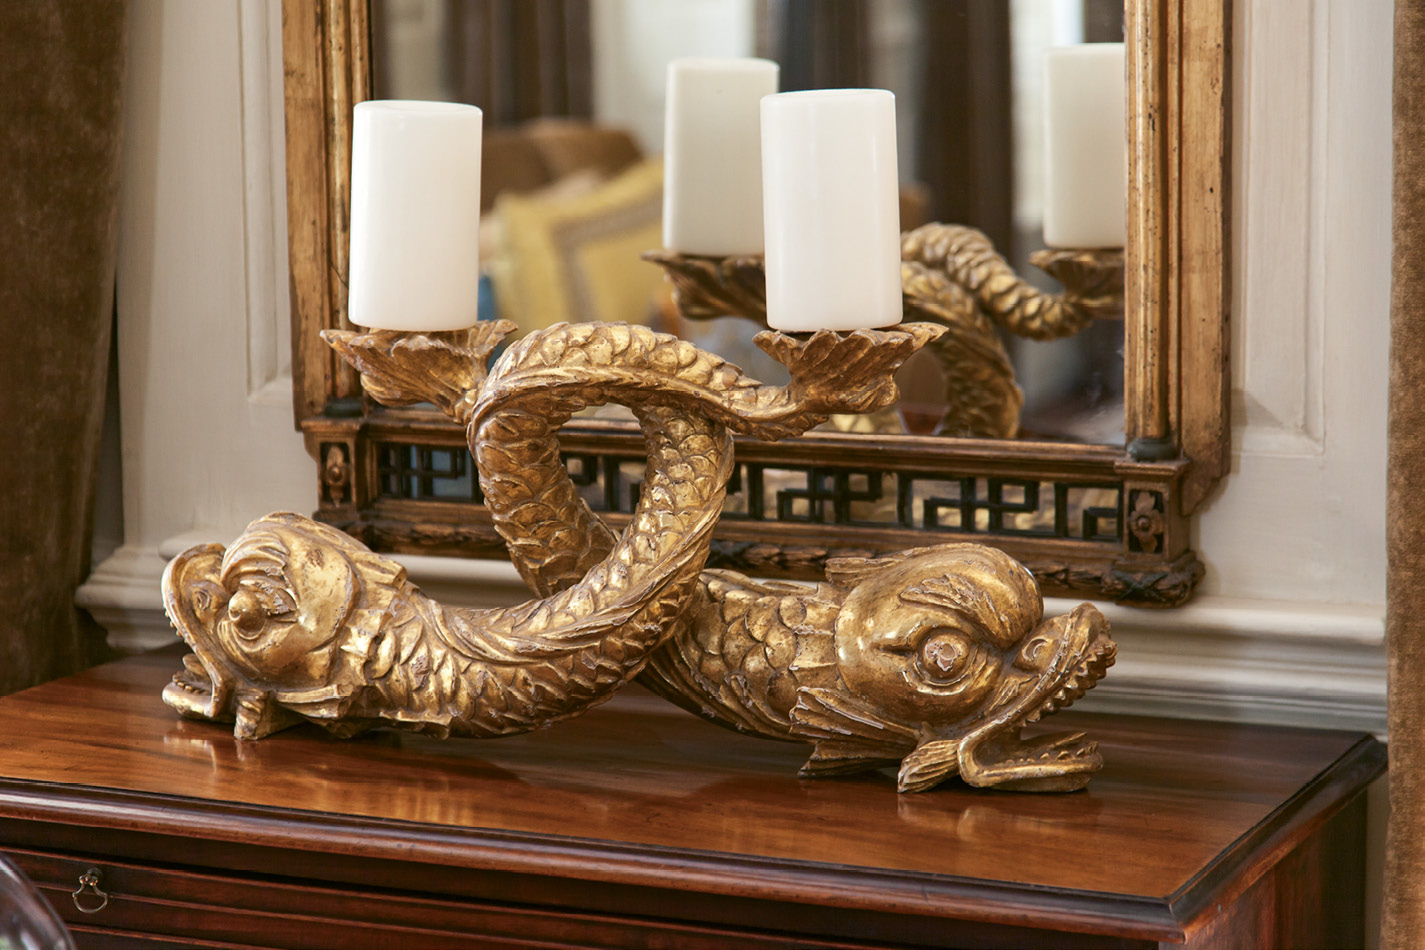 18th-century gilt dolphins found through G. Sergeant Antiques play nicely off the gold tones seen throughout.